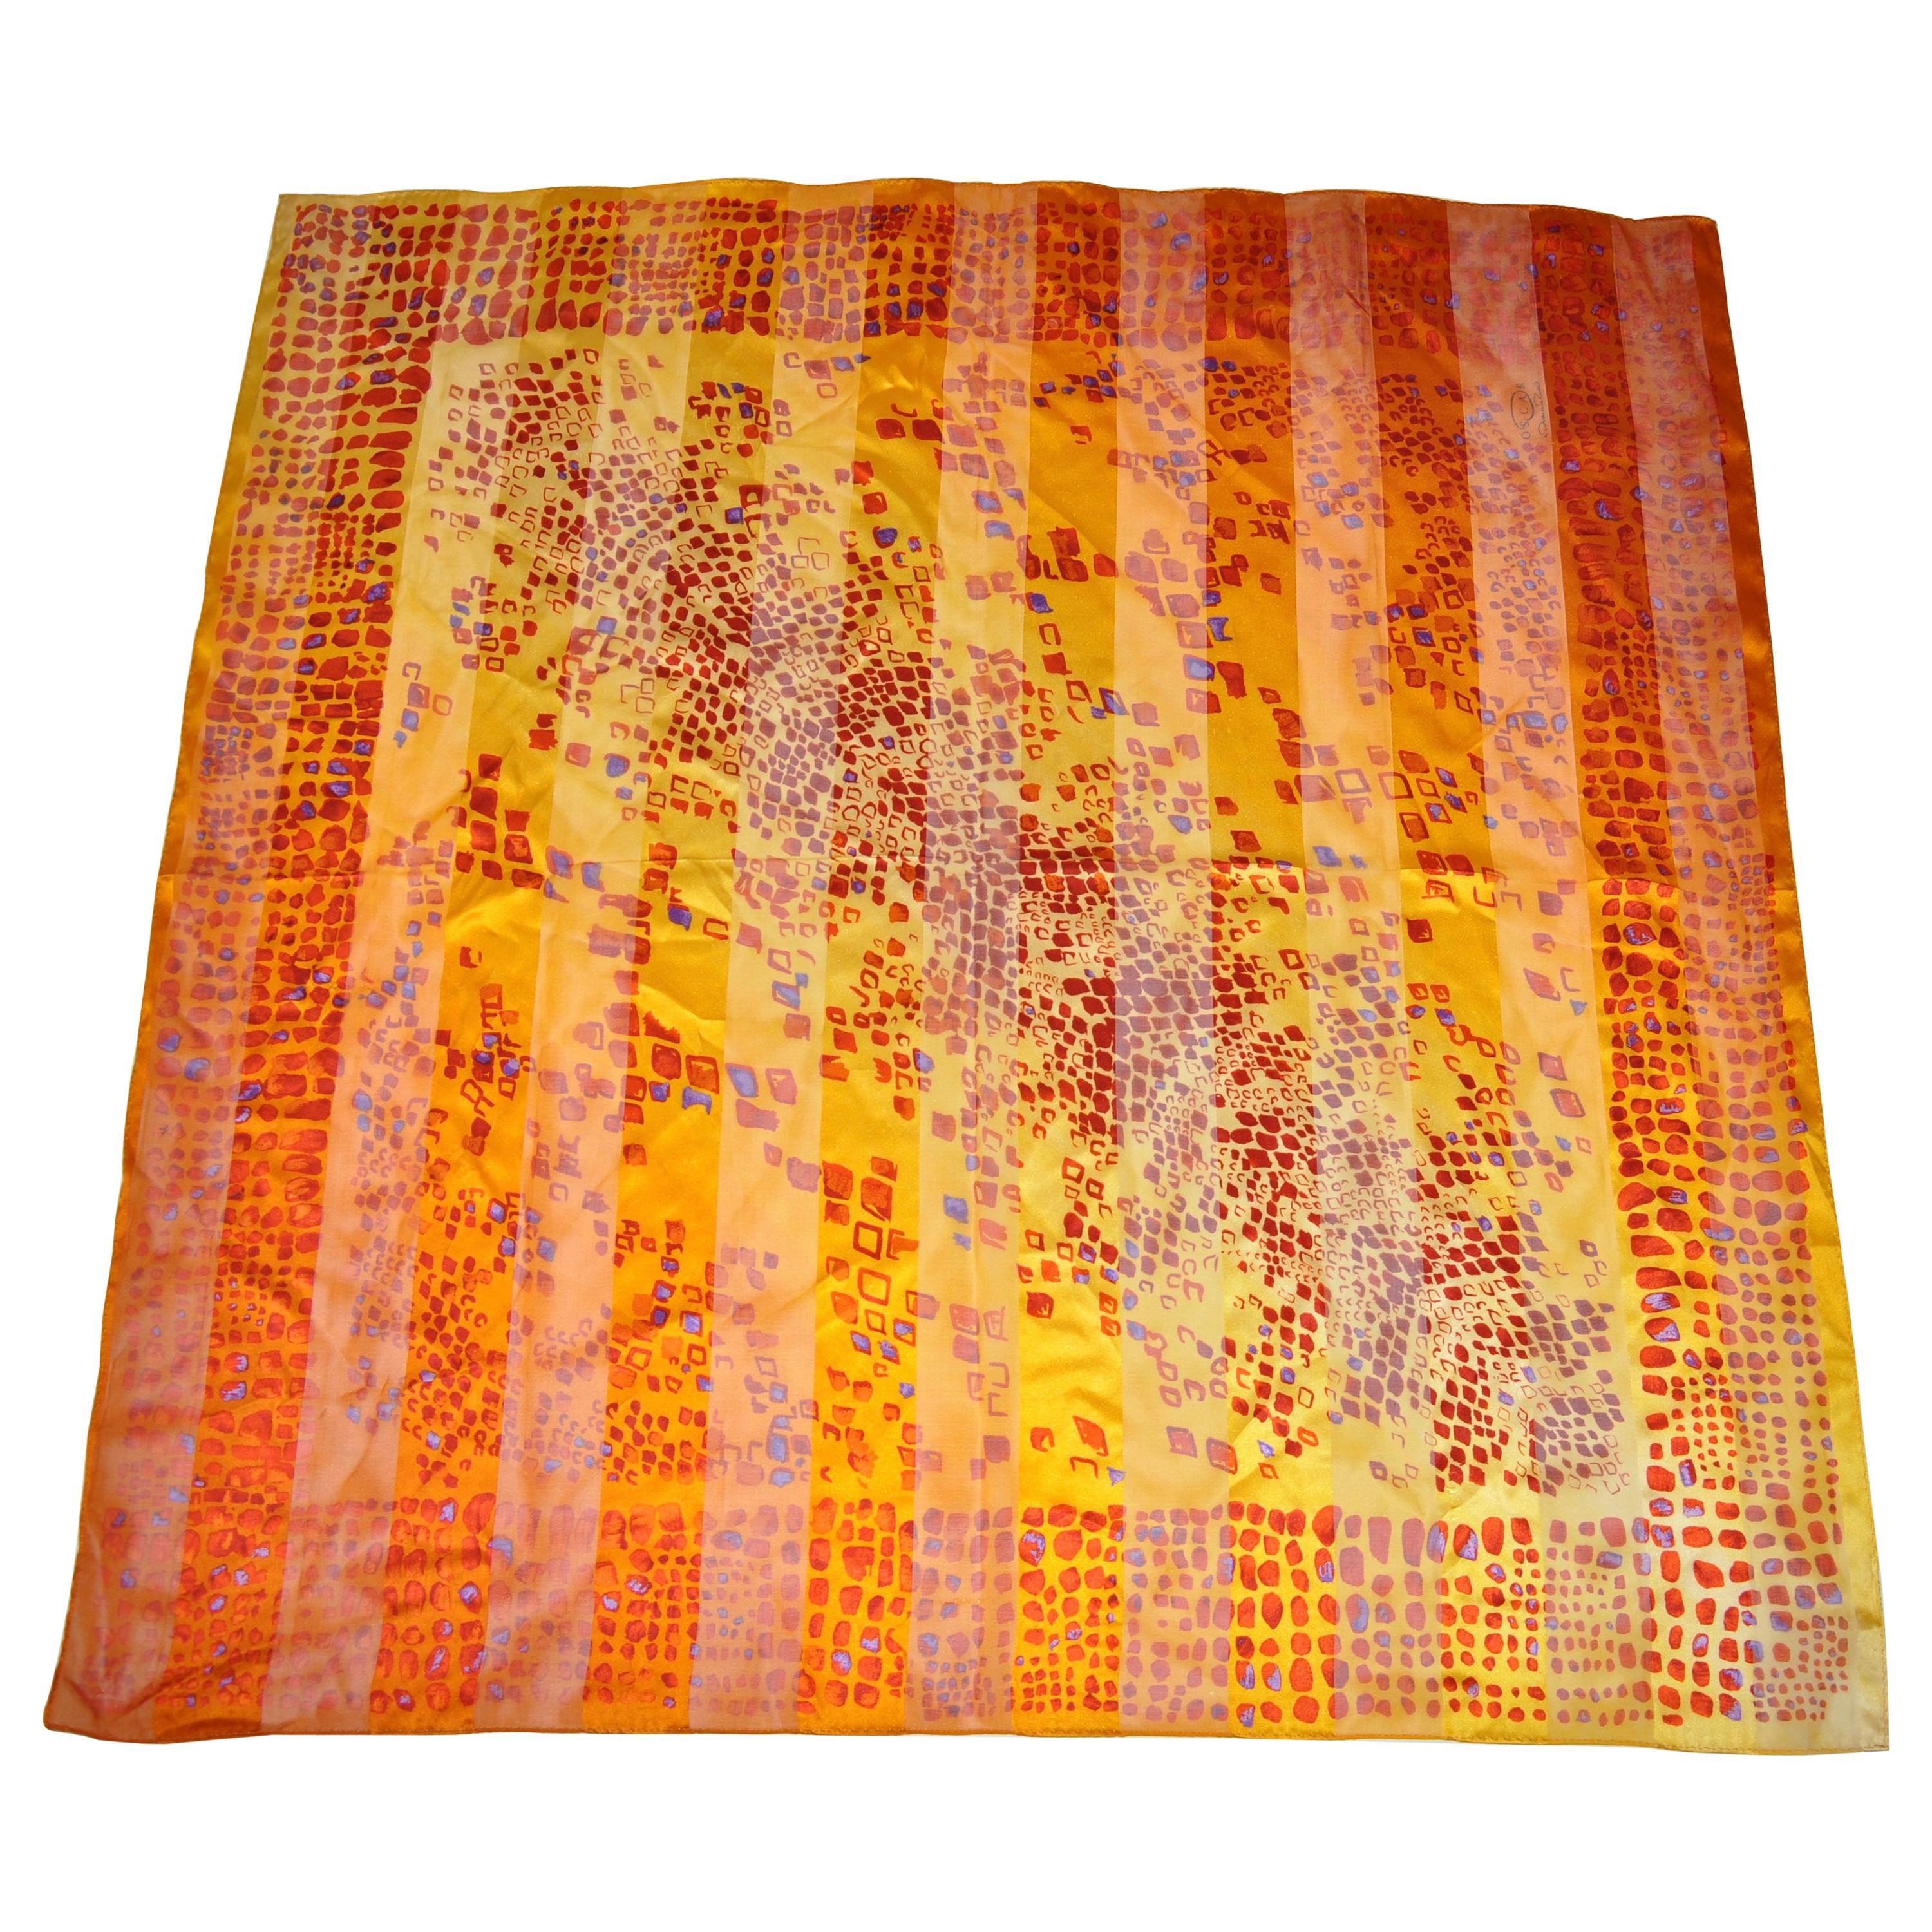 Warm Shades Of Golden Tangerine & Gold Silk and Chiffon "Pebbles" Scarf